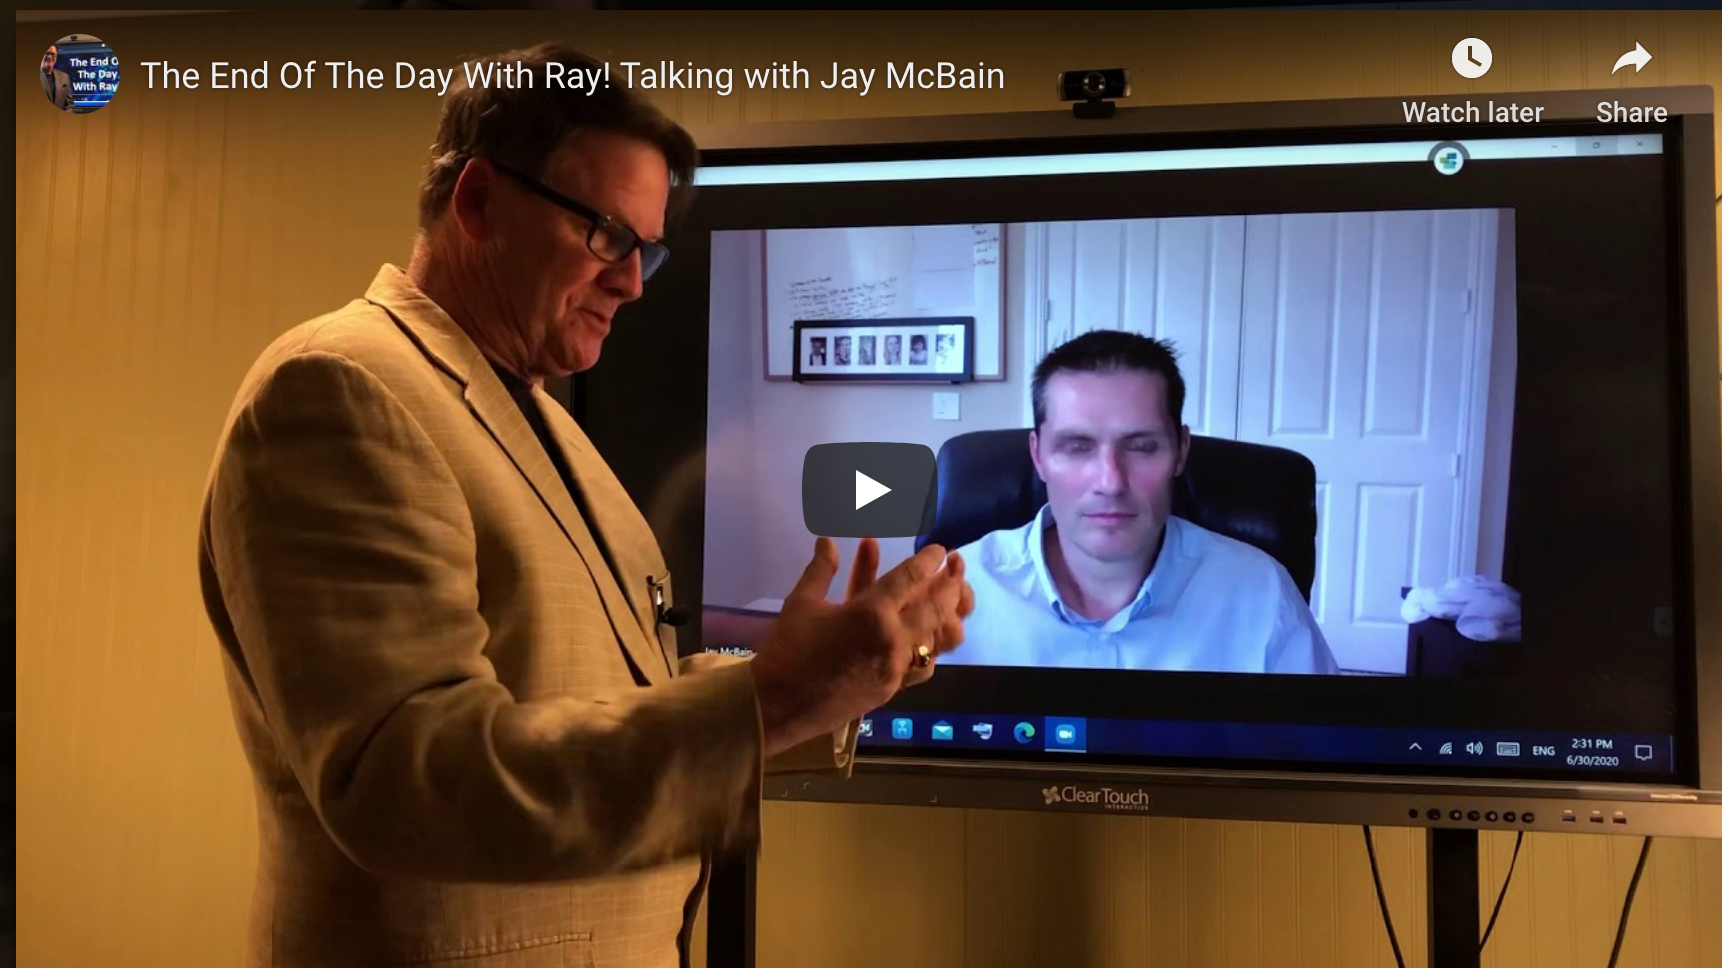 The End Of The Day With Ray! Talking with Jay McBain